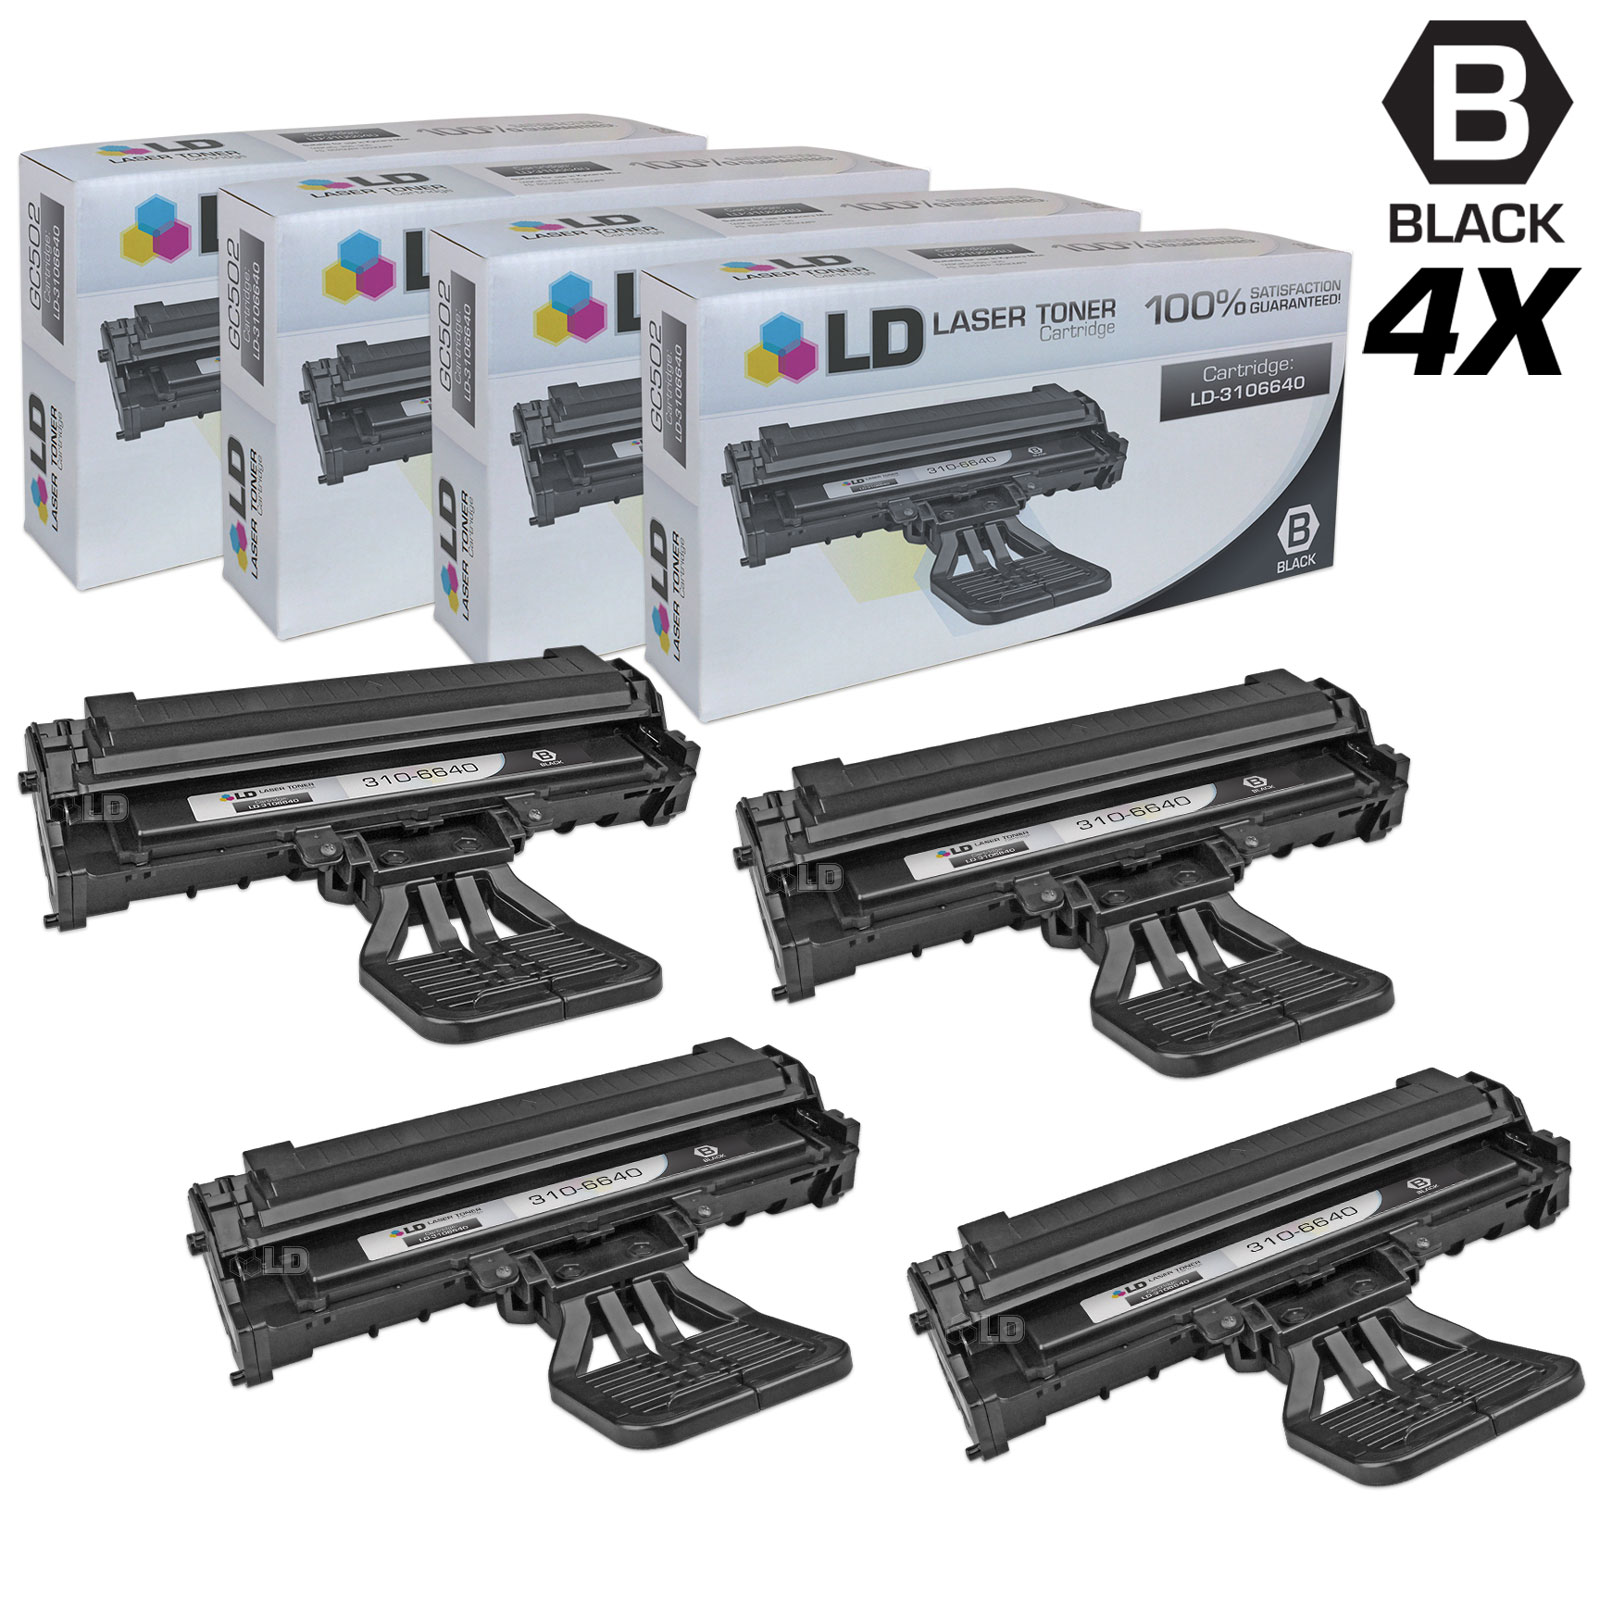 LD Compatible Replacements for Dell 310-6640 (GC502) Set of 4 Black Laser Toner Cartridges for use in Dell Laser 1100, and 1110 s - image 1 of 1